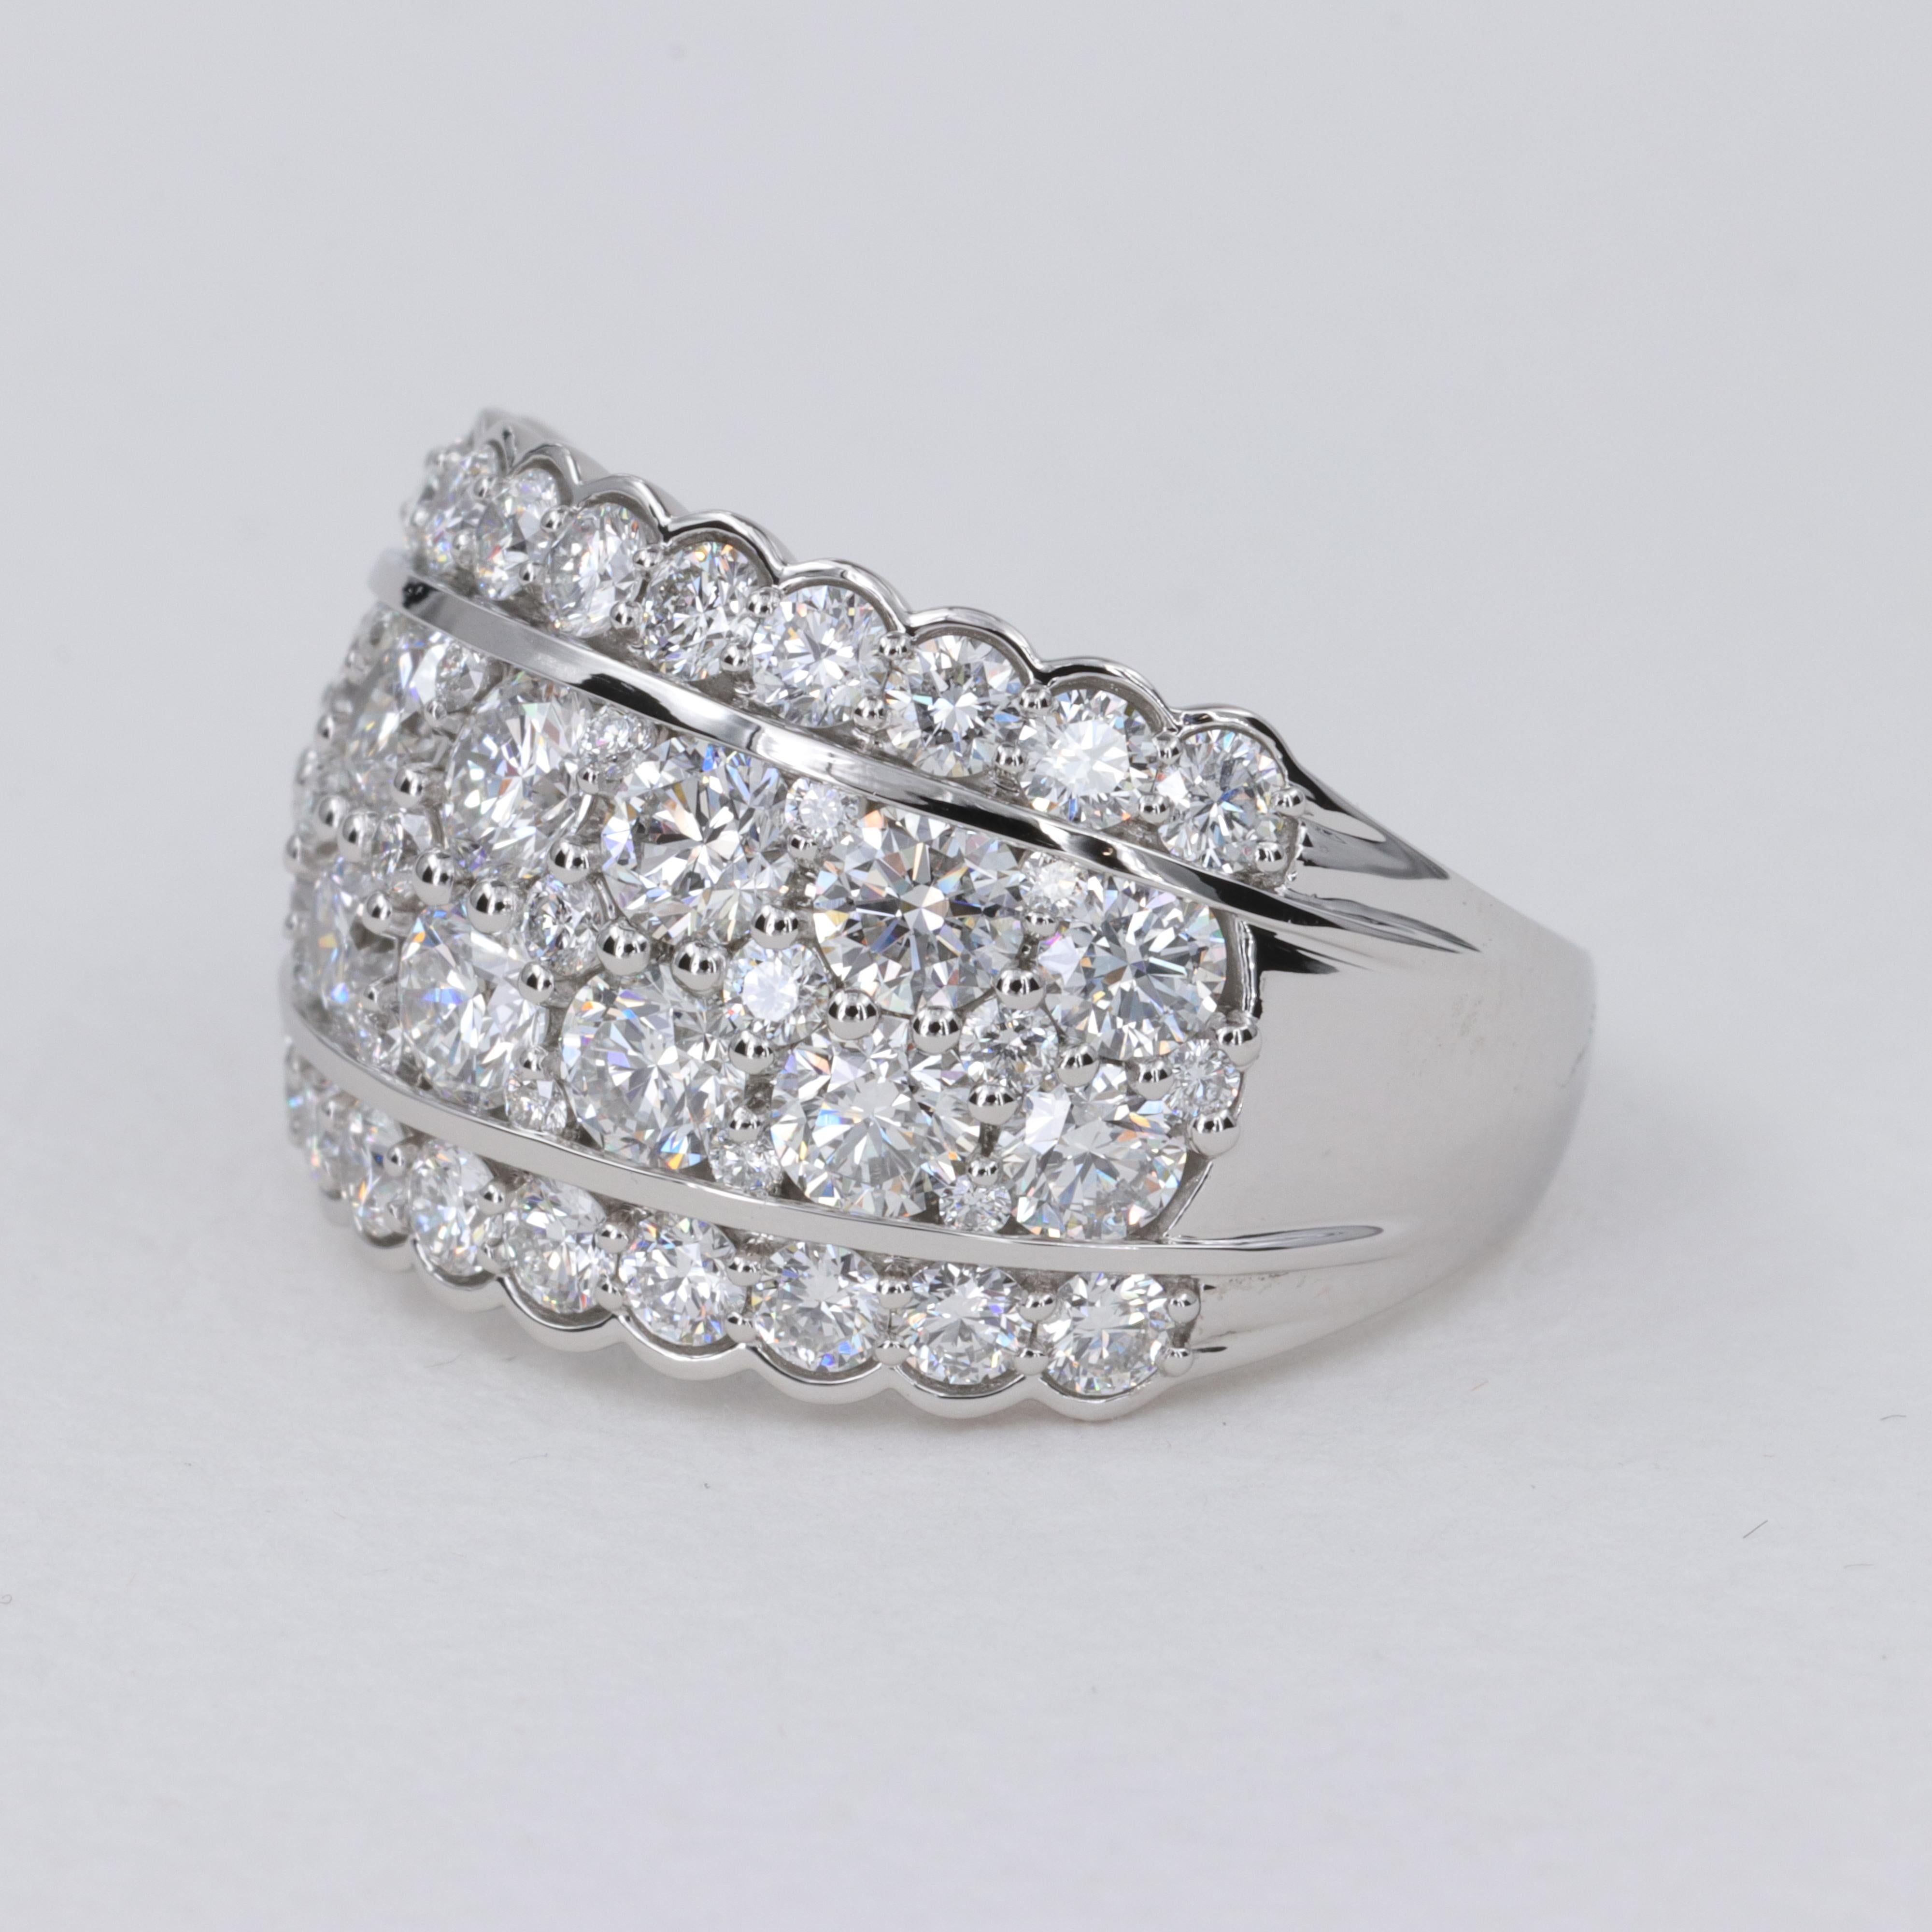 4 Carat Fine Diamond and Platinum Wide Band Ring In Excellent Condition For Sale In Tampa, FL